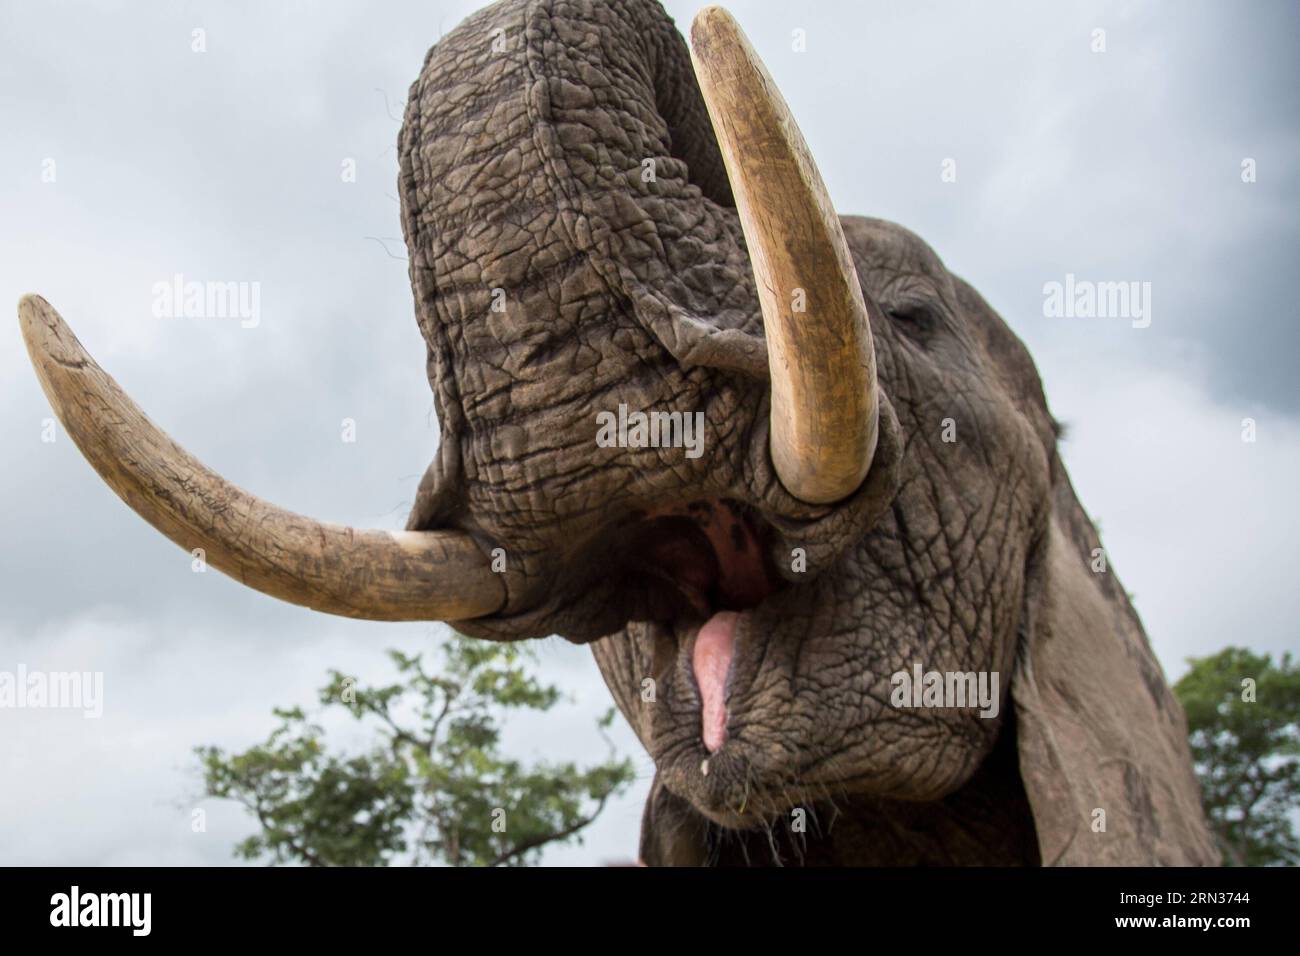 HARARE, April 7, 2015 -- Male elephant Boxer opens its mouth to let tourists check its teeth during an elephant interaction program at a game park in Selous, 70 km from Harare, capital of Zimbabwe, on April 7, 2015. Home to around 80,000 to 100,000 elephants, Zimbabwe is considered one of the world s prime elephant sanctuaries. Animal rights groups propose developing eco-tourism which generate tourism revenue and help reserve the wildlife at their comfort zone at the same time. ) ZIMBABWE-HARARE-TOURISM-ELEPHANTS XuxLingui PUBLICATIONxNOTxINxCHN   Harare April 7 2015 Male Elephant Boxer Opens Stock Photo